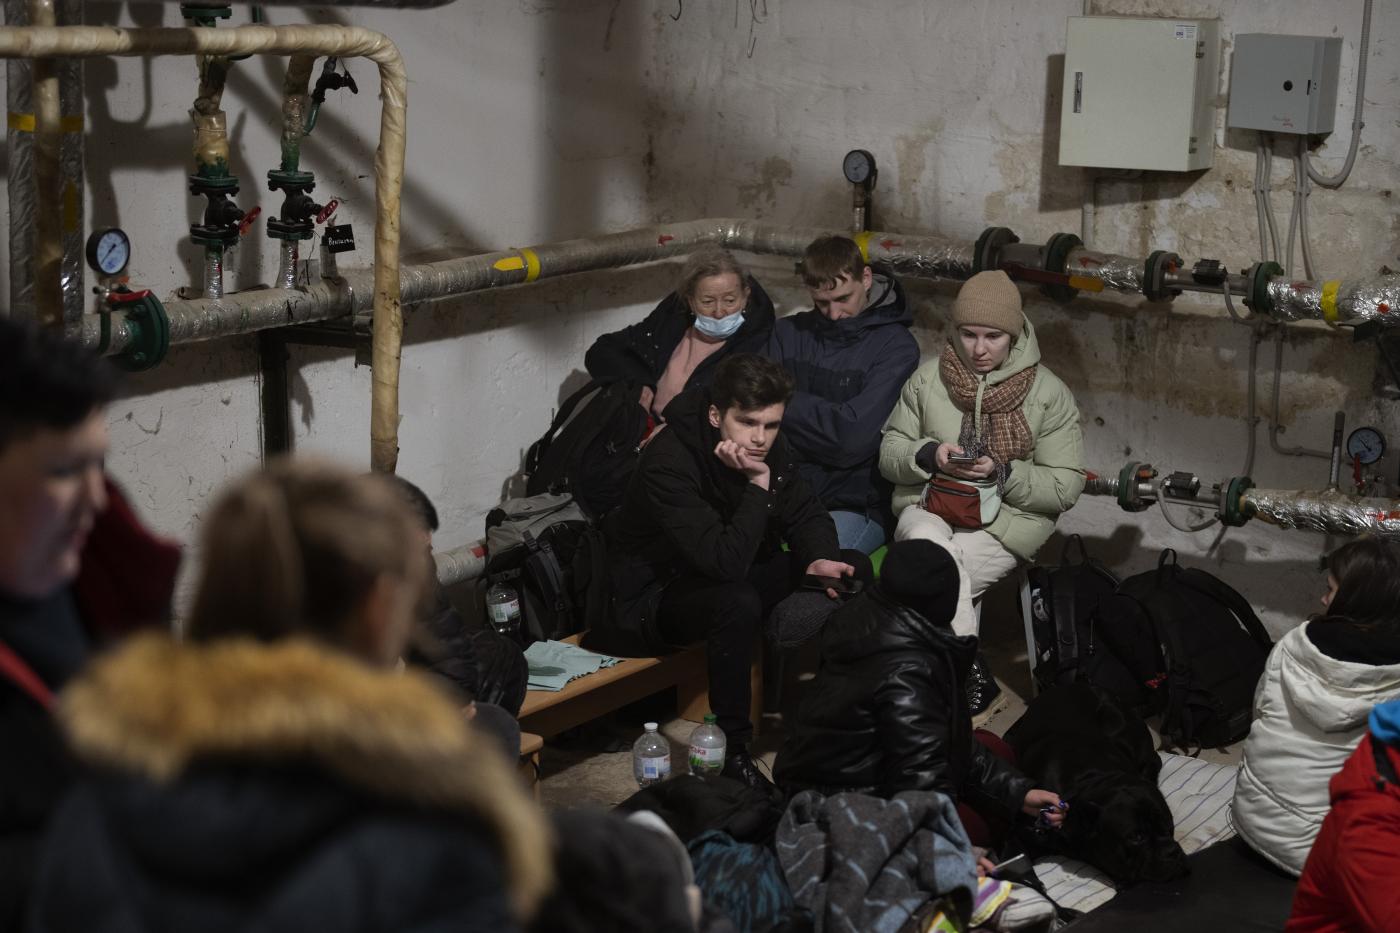 People take shelter at a building basement while the sirens sound announcing new attacks in the city of Kyiv, Ukraine, Friday, Feb. 25, 2022. (AP Photo/Emilio Morenatti)